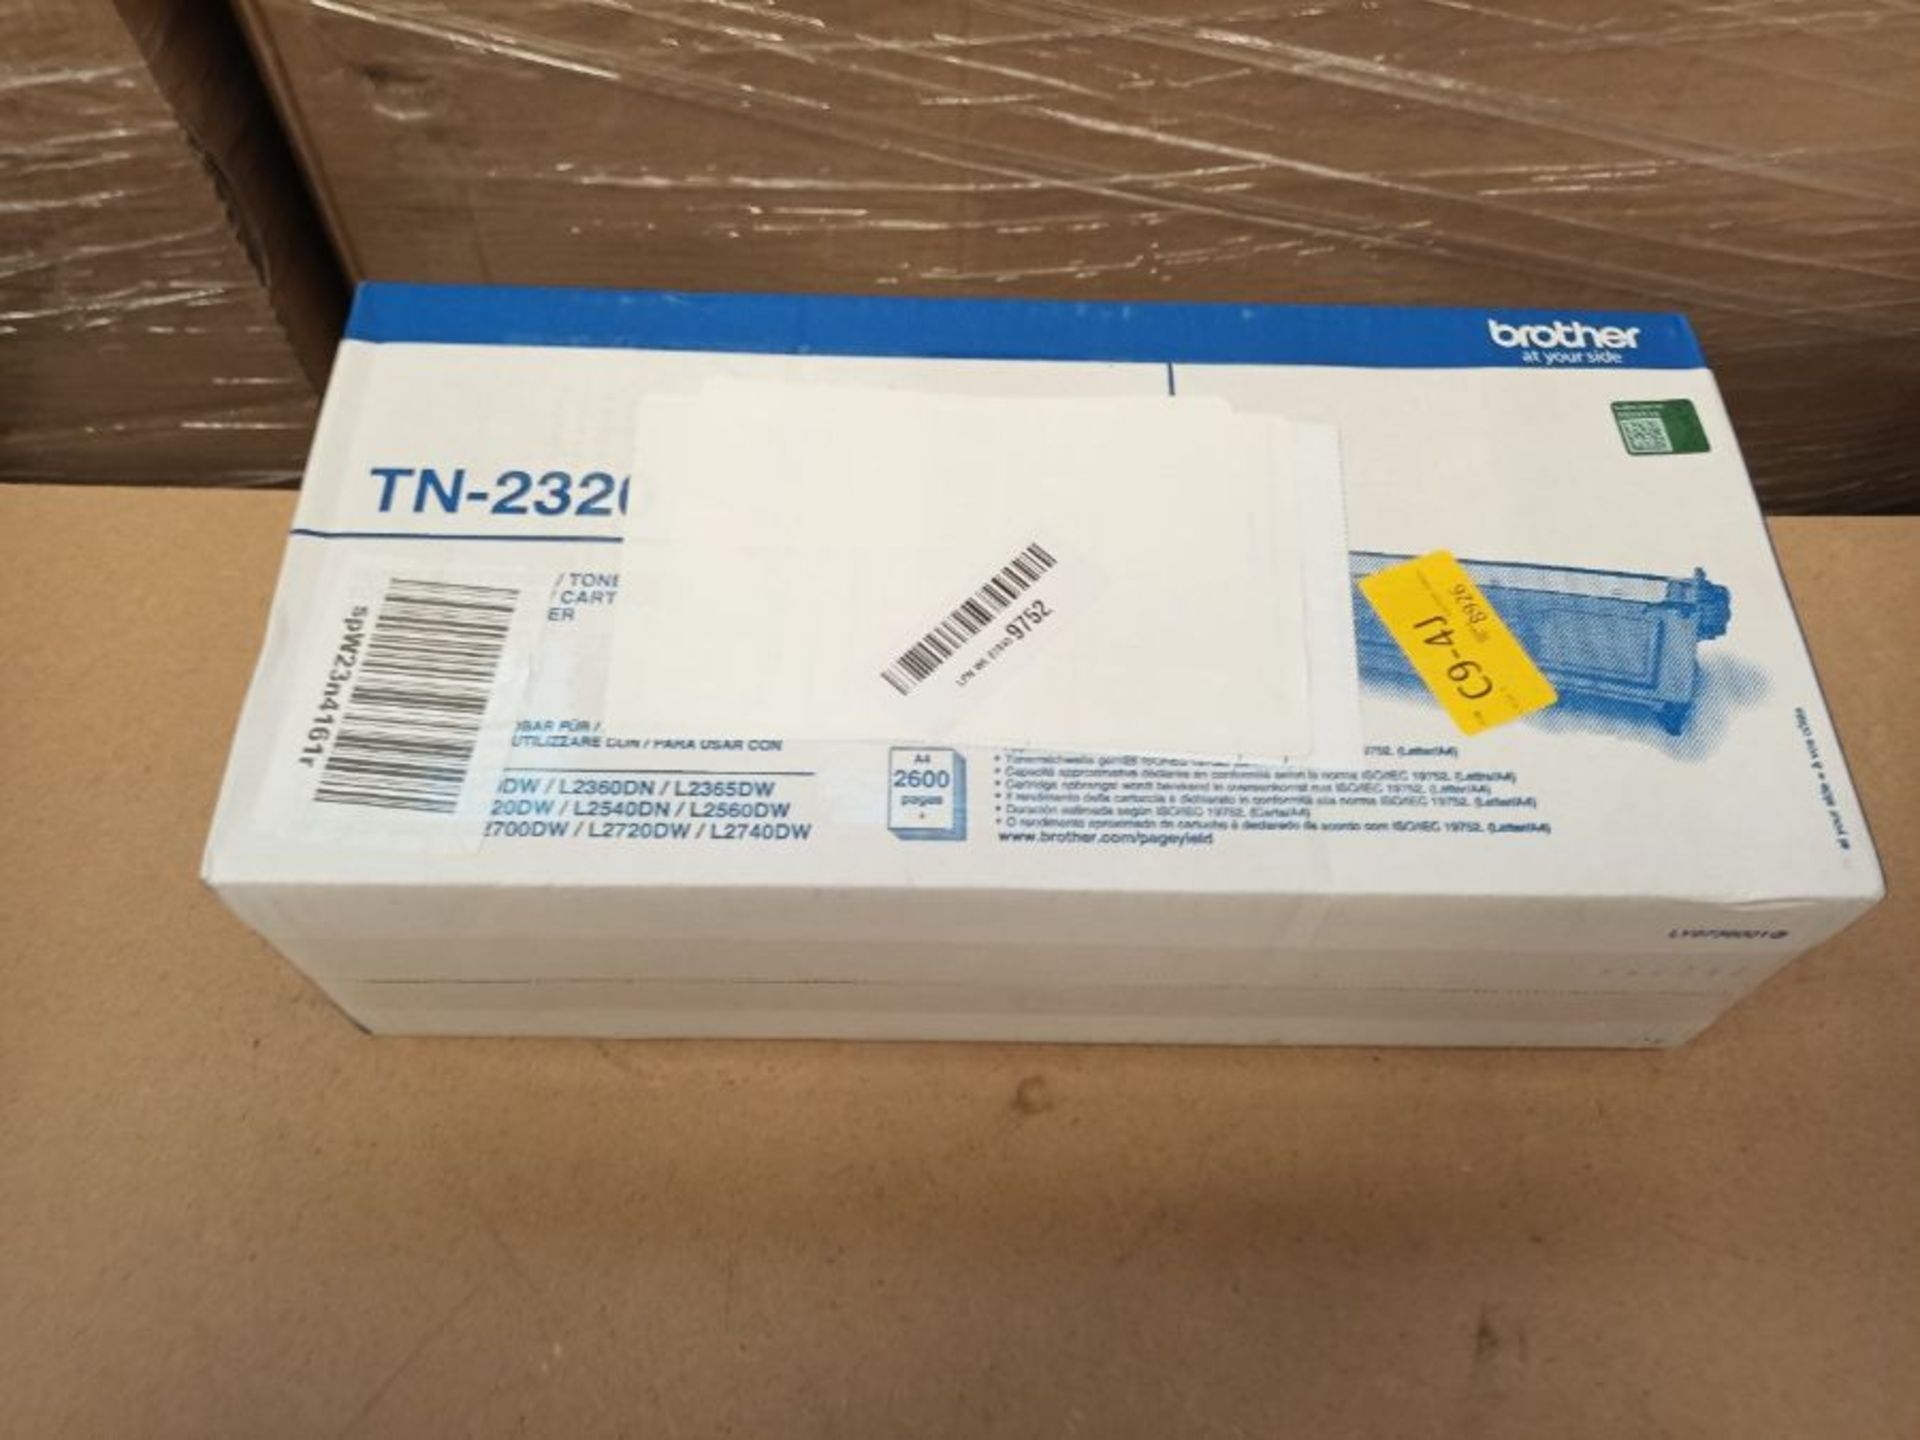 RRP £56.00 Brother TN-2320 Toner Cartridge, Black, Single Pack, High Yield, Includes 1 x Toner Ca - Image 2 of 3